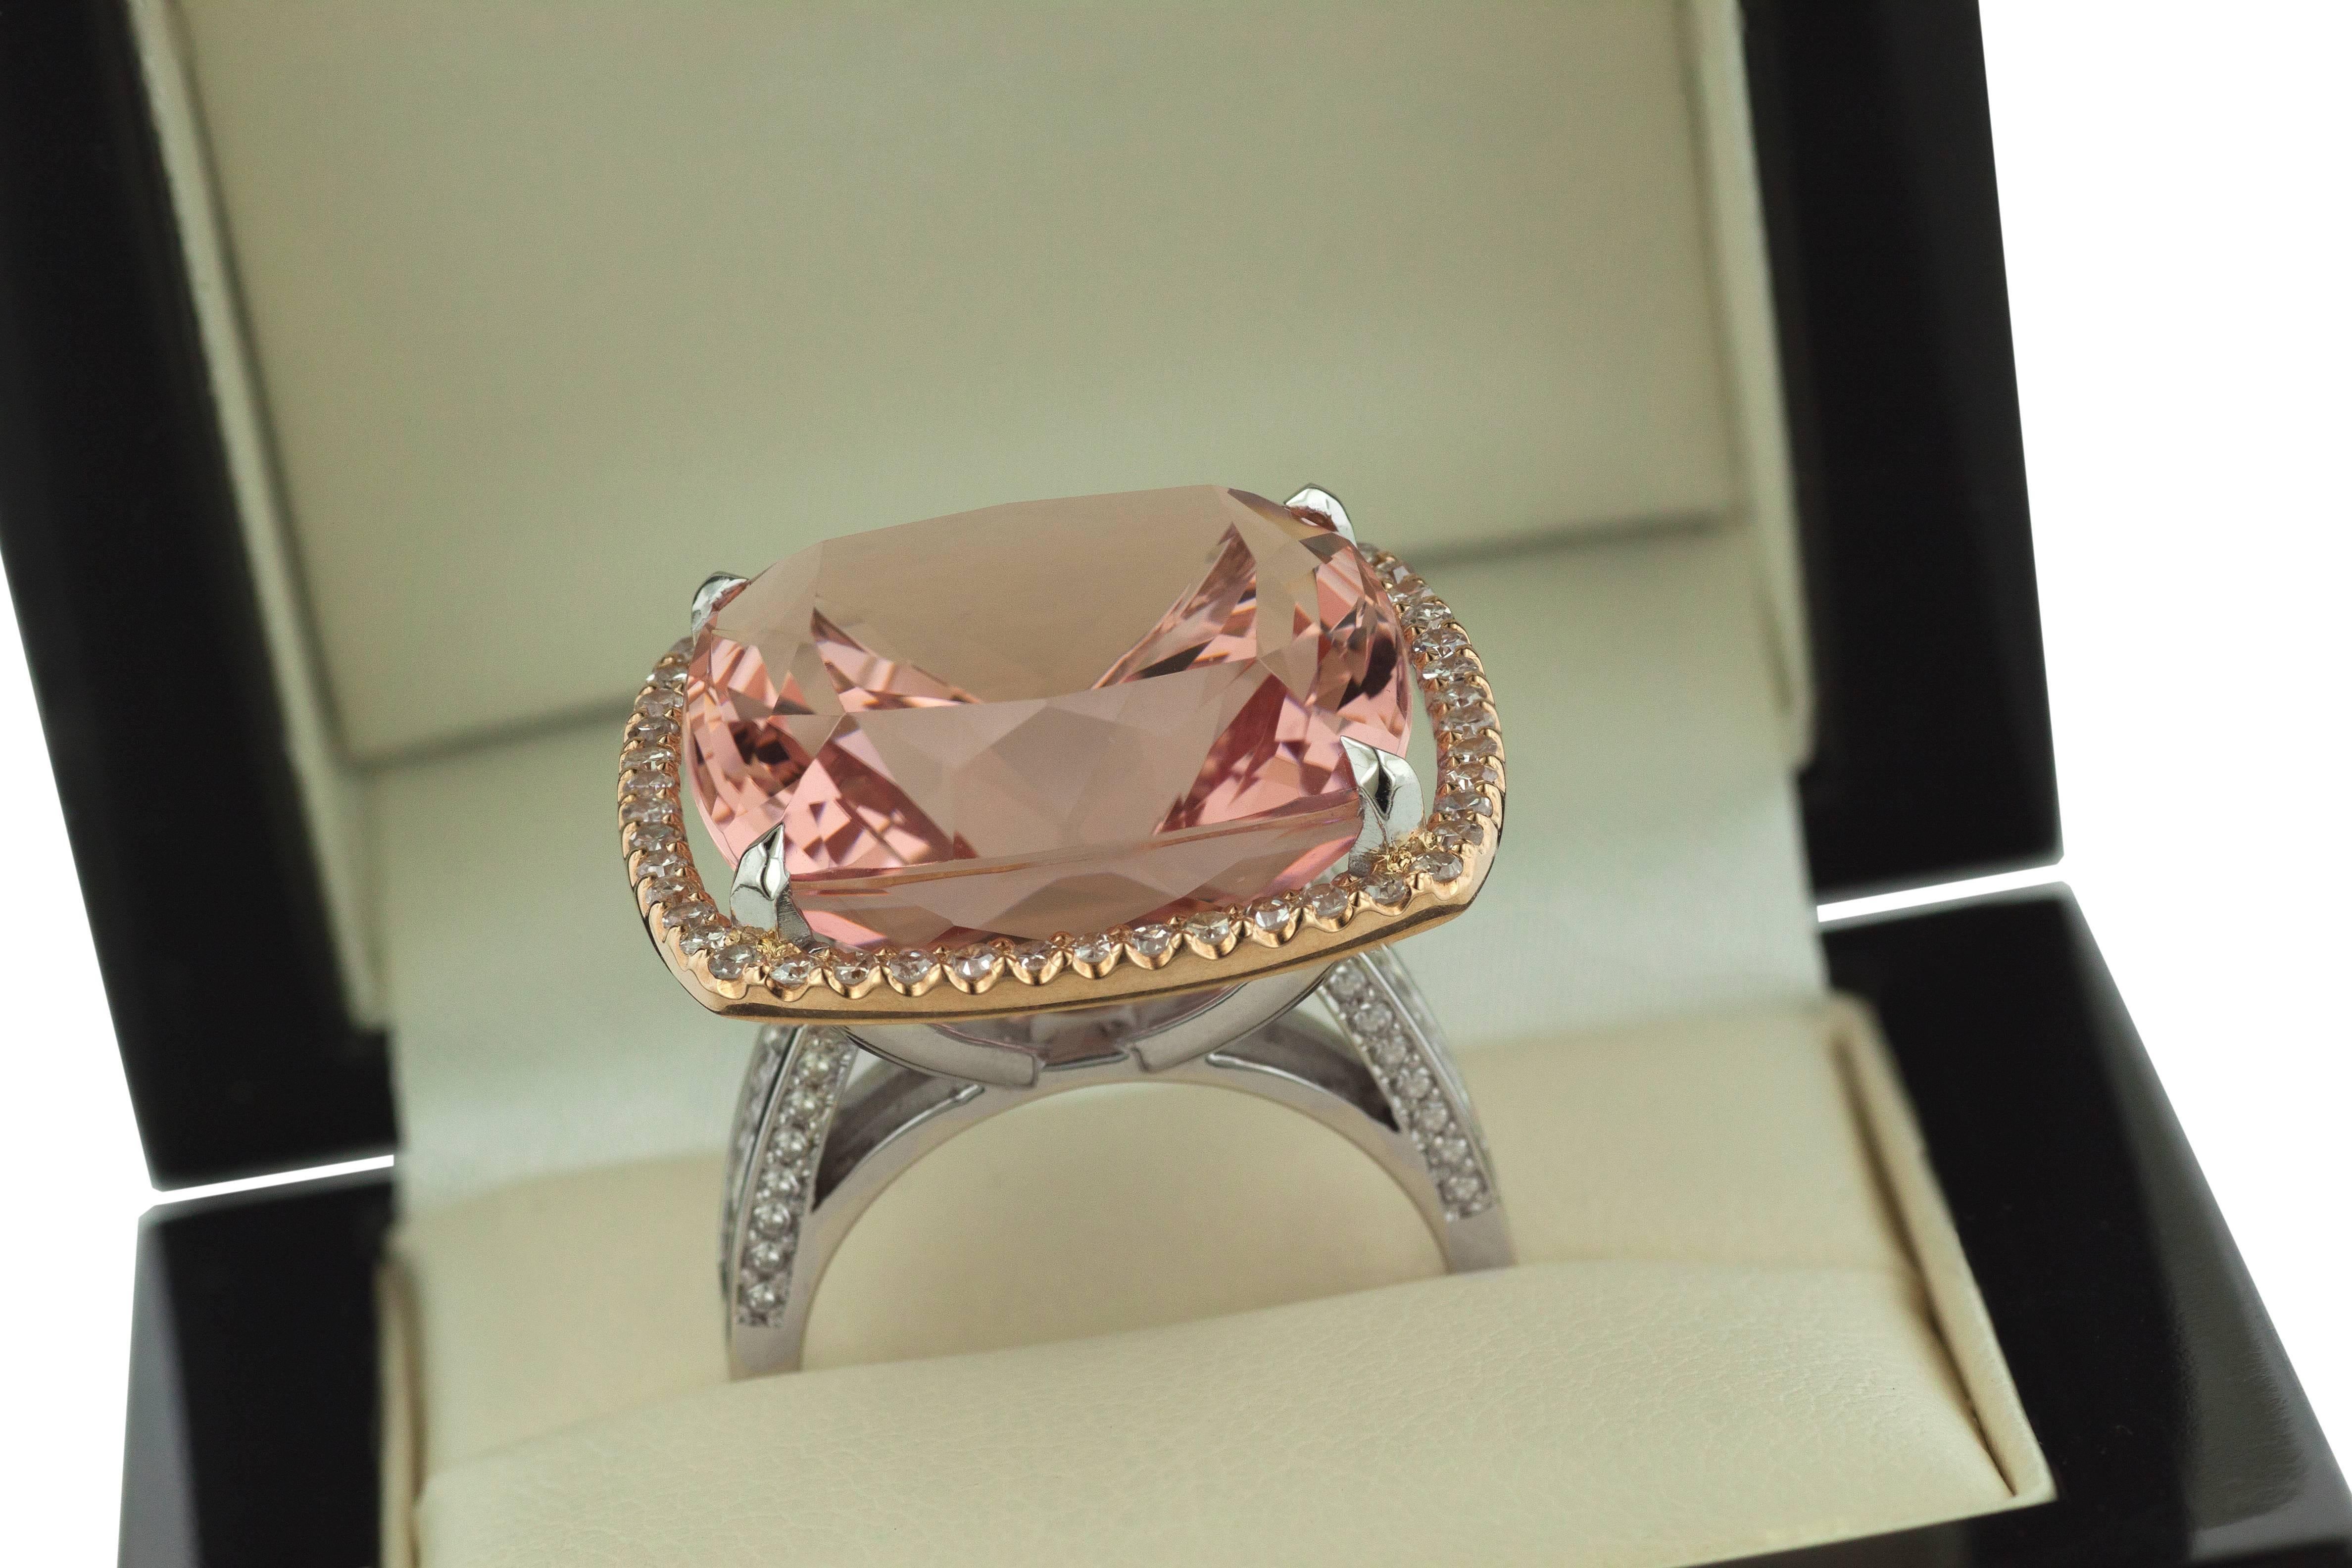 Brand new, one-of-a-kind, pink Morganite & Diamond cocktail ring. The white & rose gold ring is especially designed for this beautiful gemstone, to maximize its fire and sparkle. This exclusive jewelry piece contains 8 princess-cut diamonds